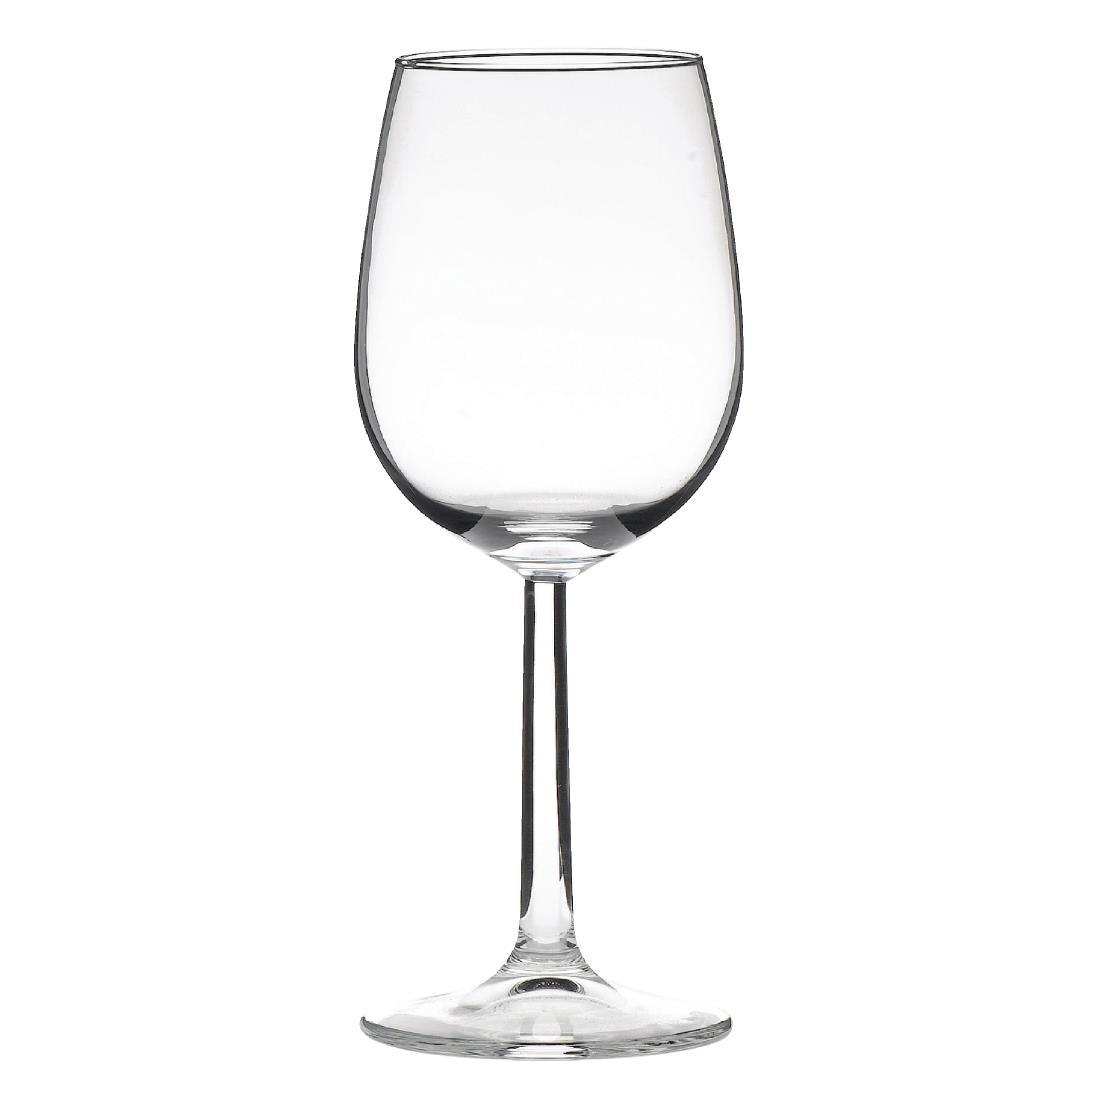 Royal Leerdam Bouquet Red Wine Glasses 290ml (Pack of 12) - CT069  - 1